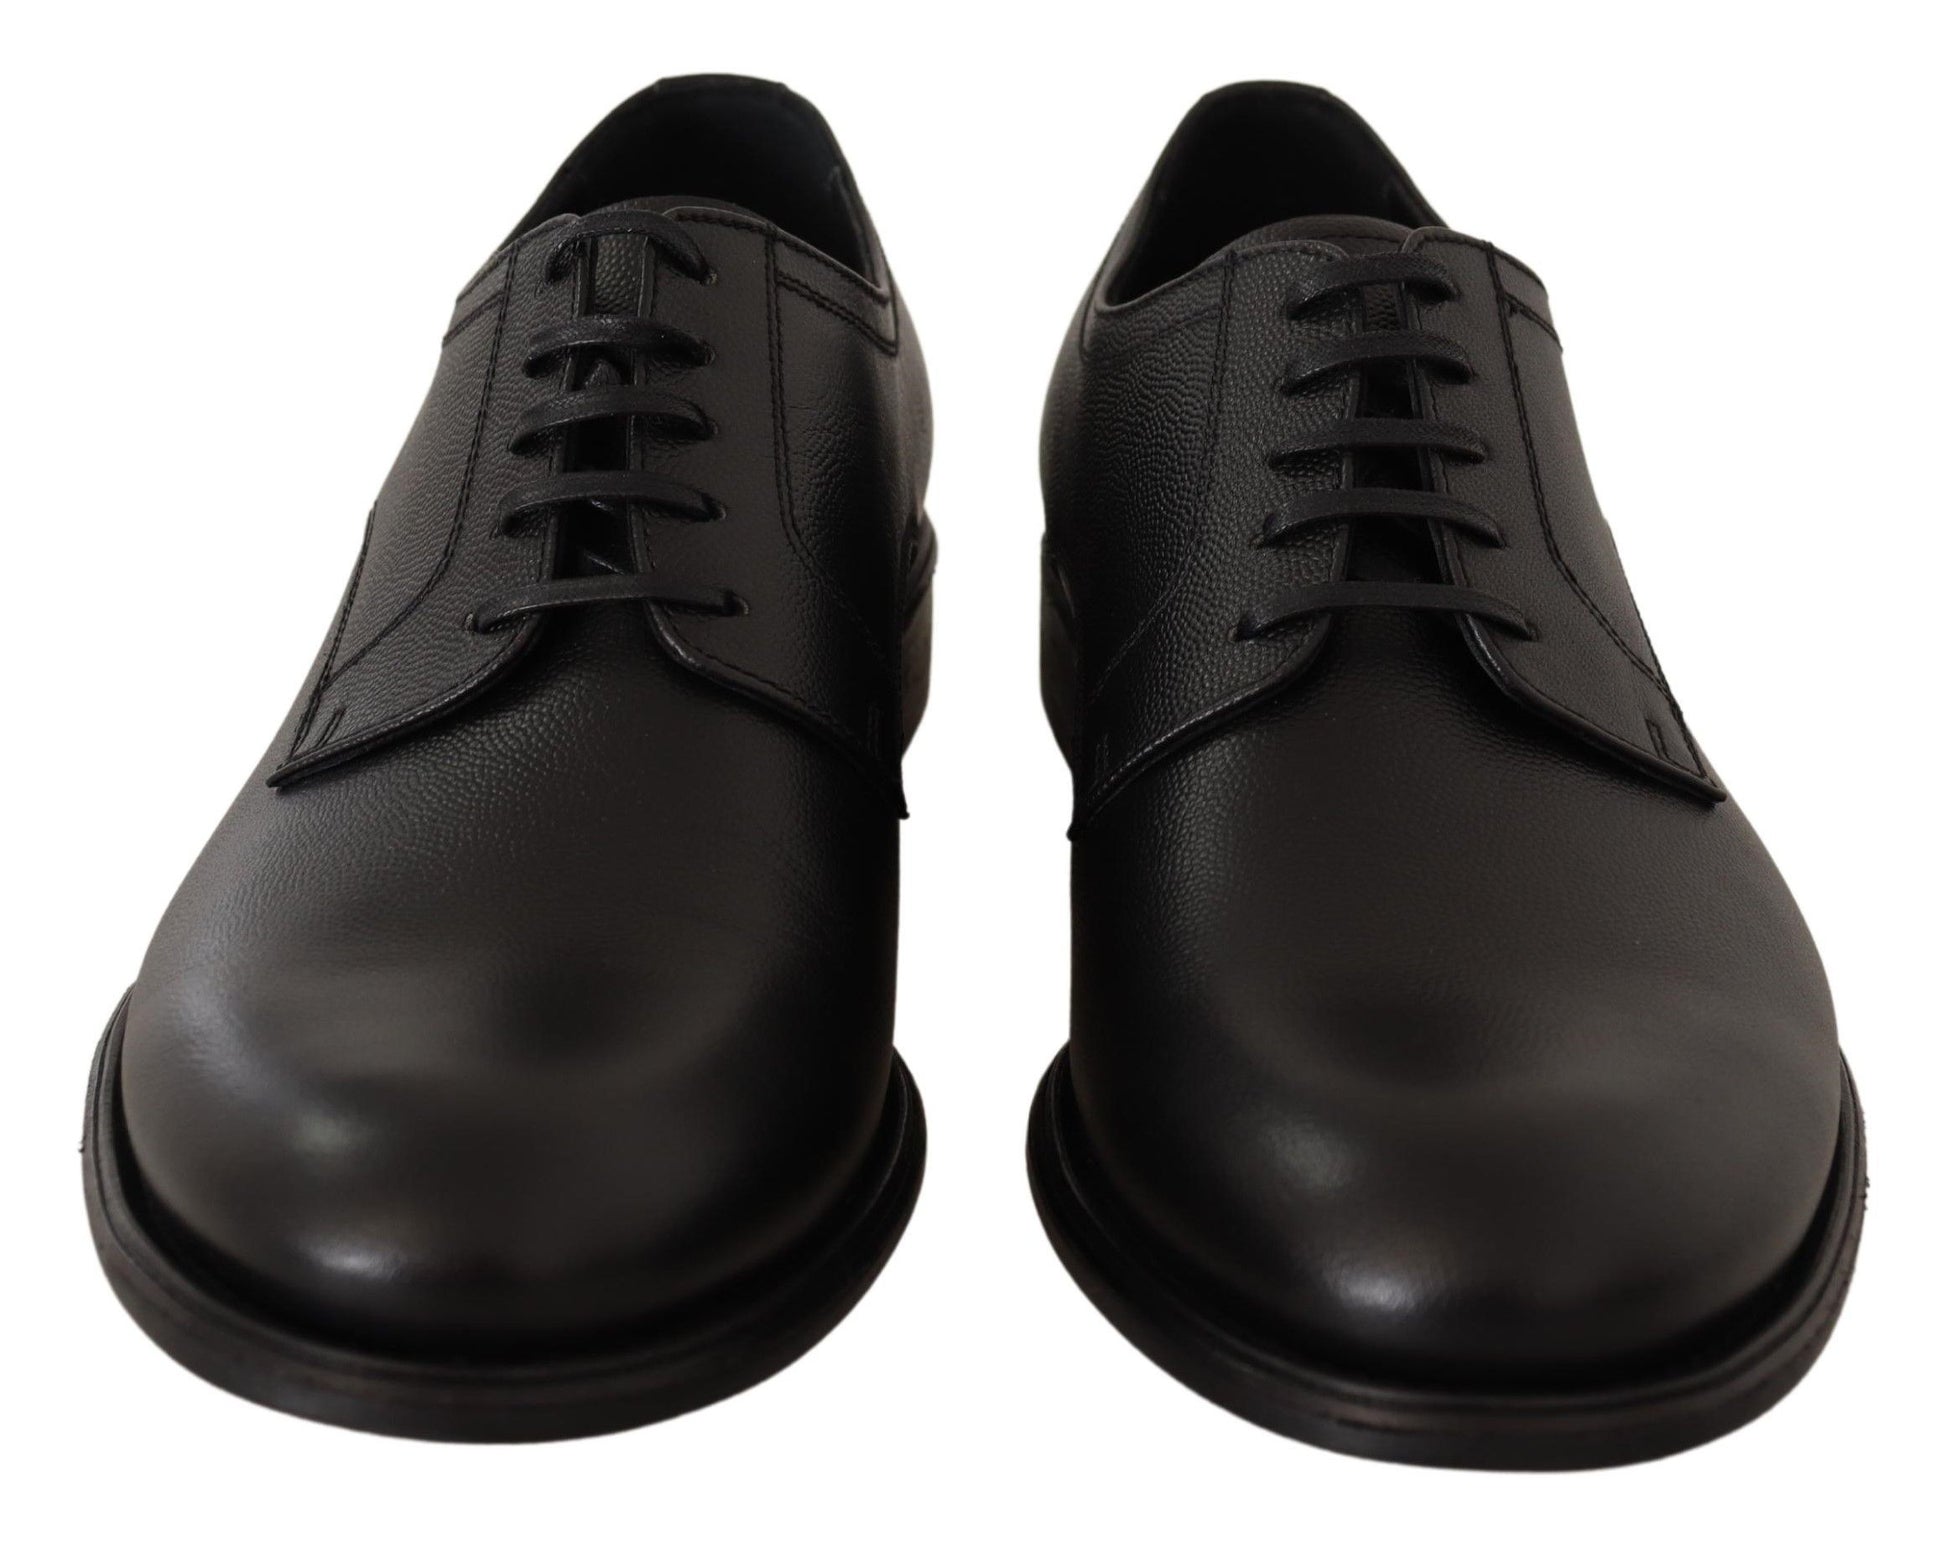 Black Leather Lace Up Mens Formal Derby Shoes - Designed by Dolce & Gabbana Available to Buy at a Discounted Price on Moon Behind The Hill Online Designer Discount Store